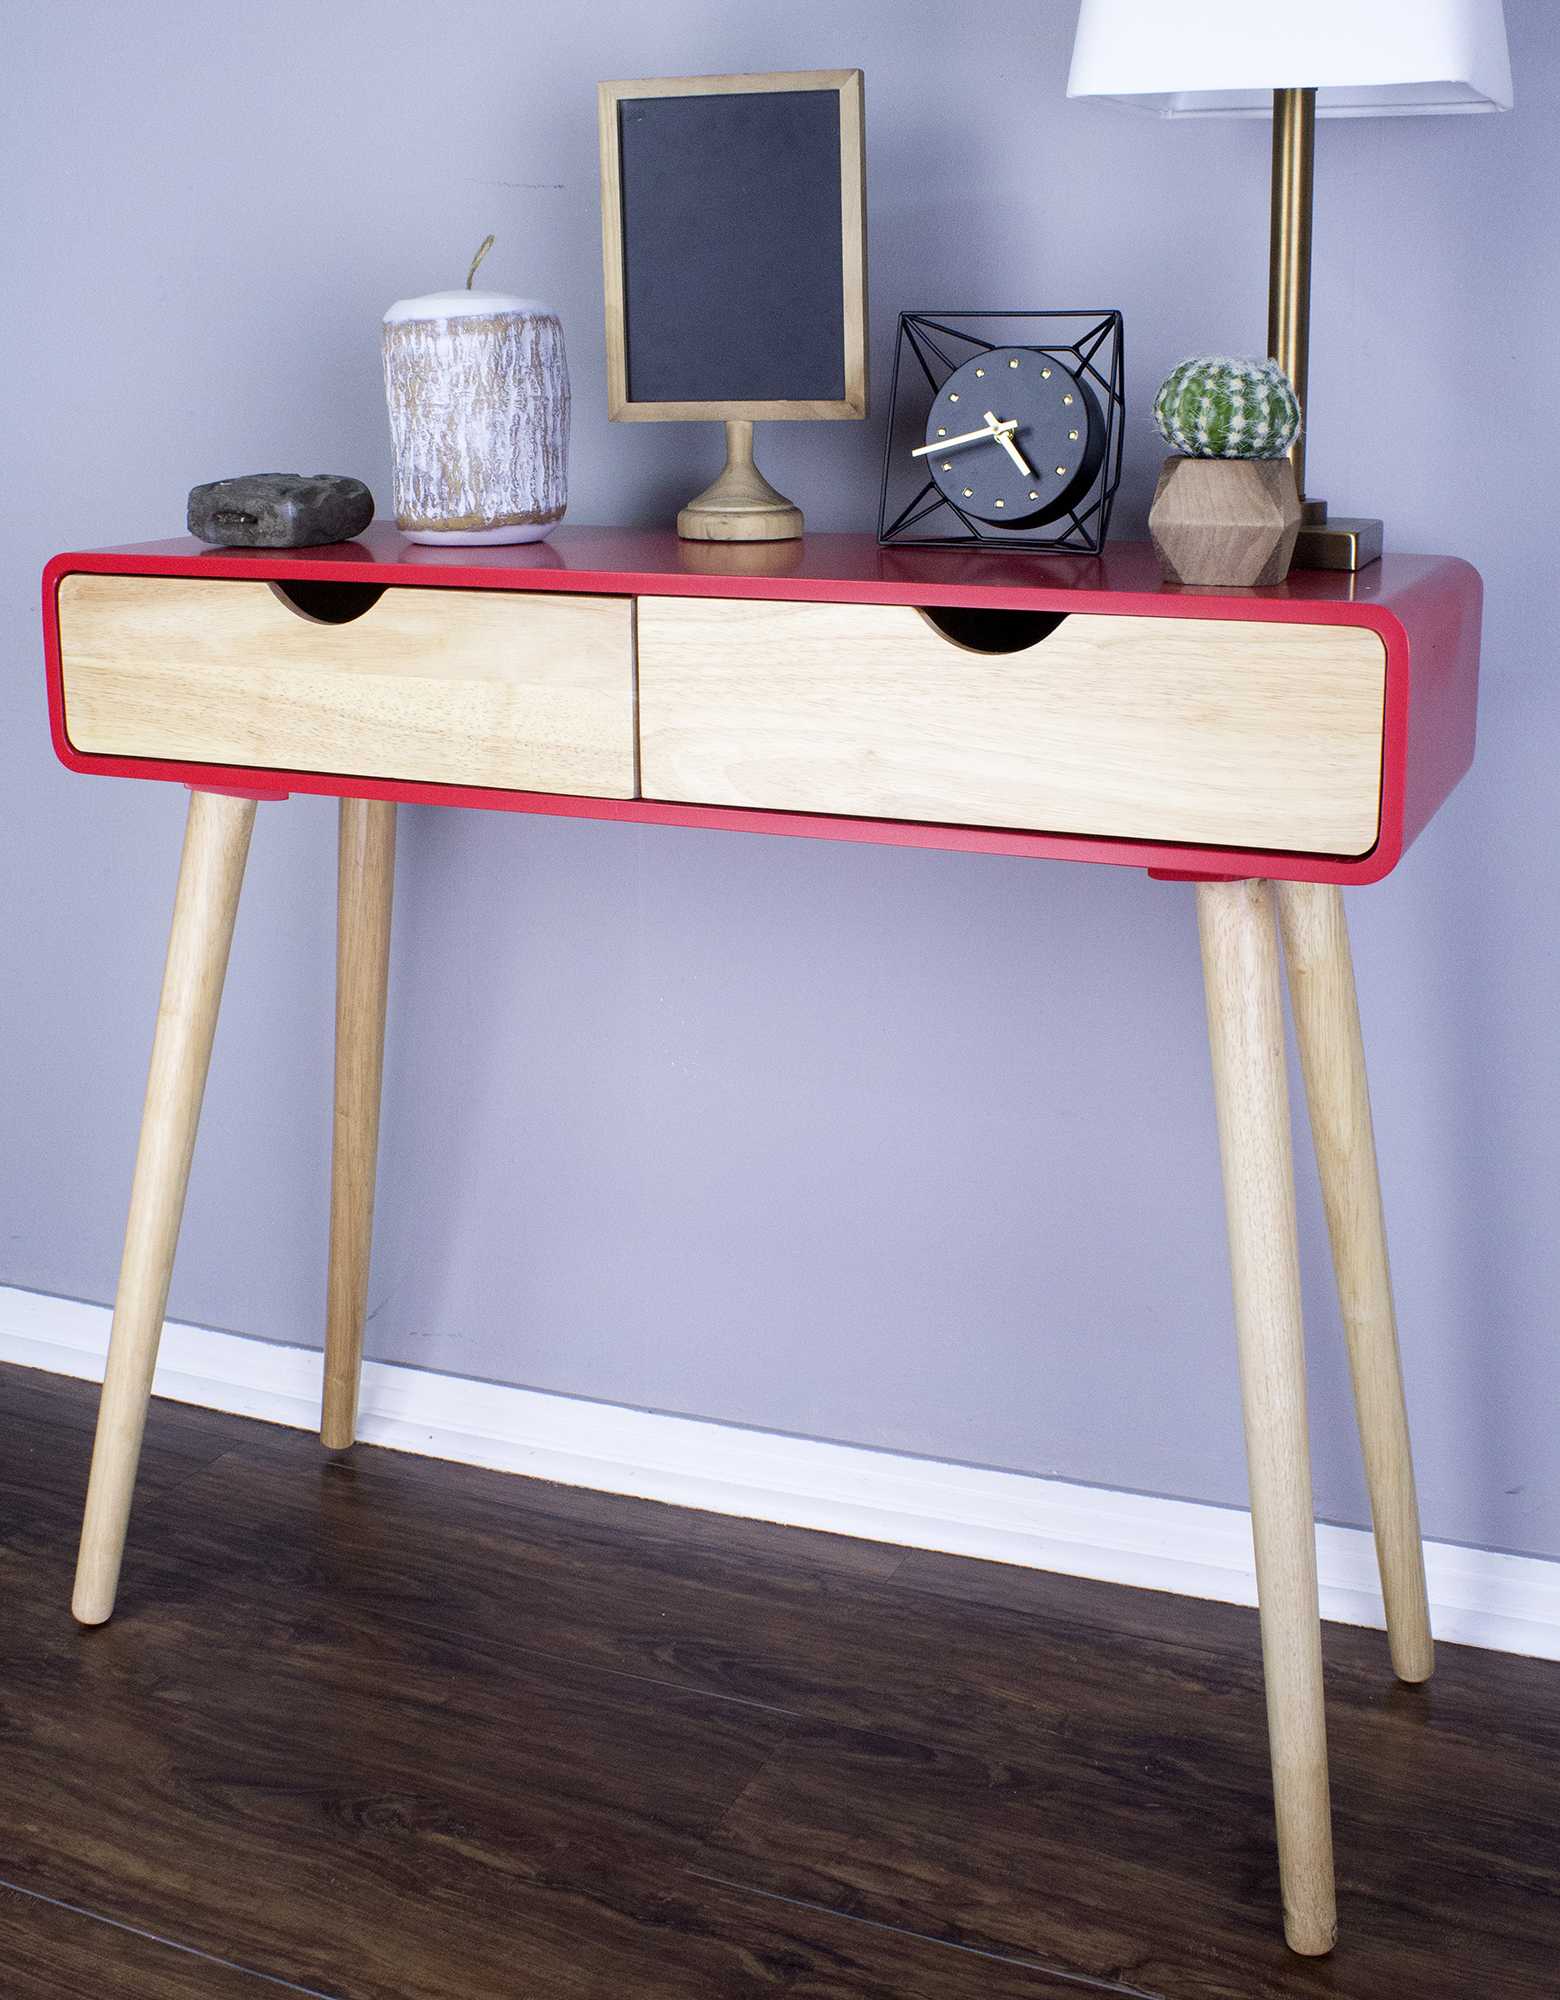 38.5" X 9" X 17" Red MDF Wood Console Table with Drawers